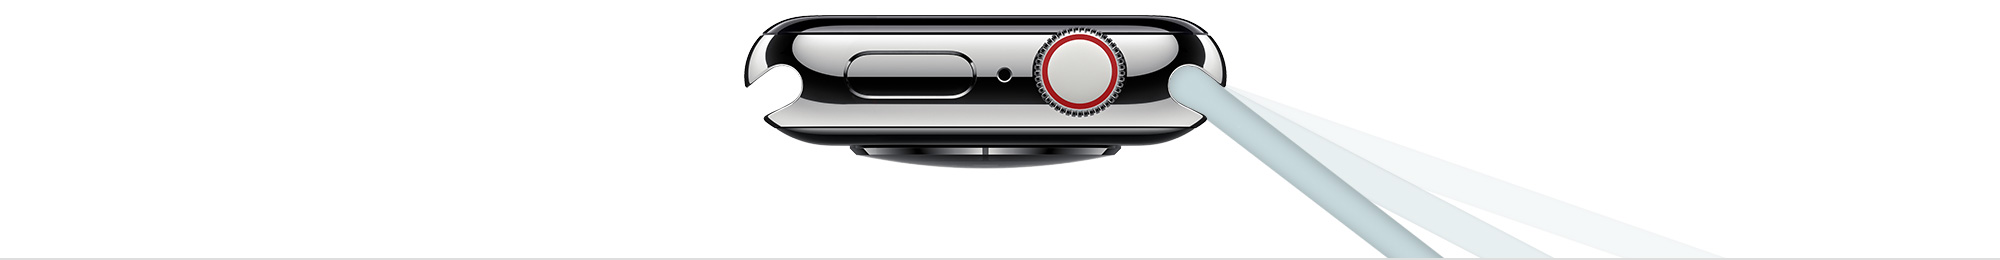 apple-watch-series4-band-in-housing